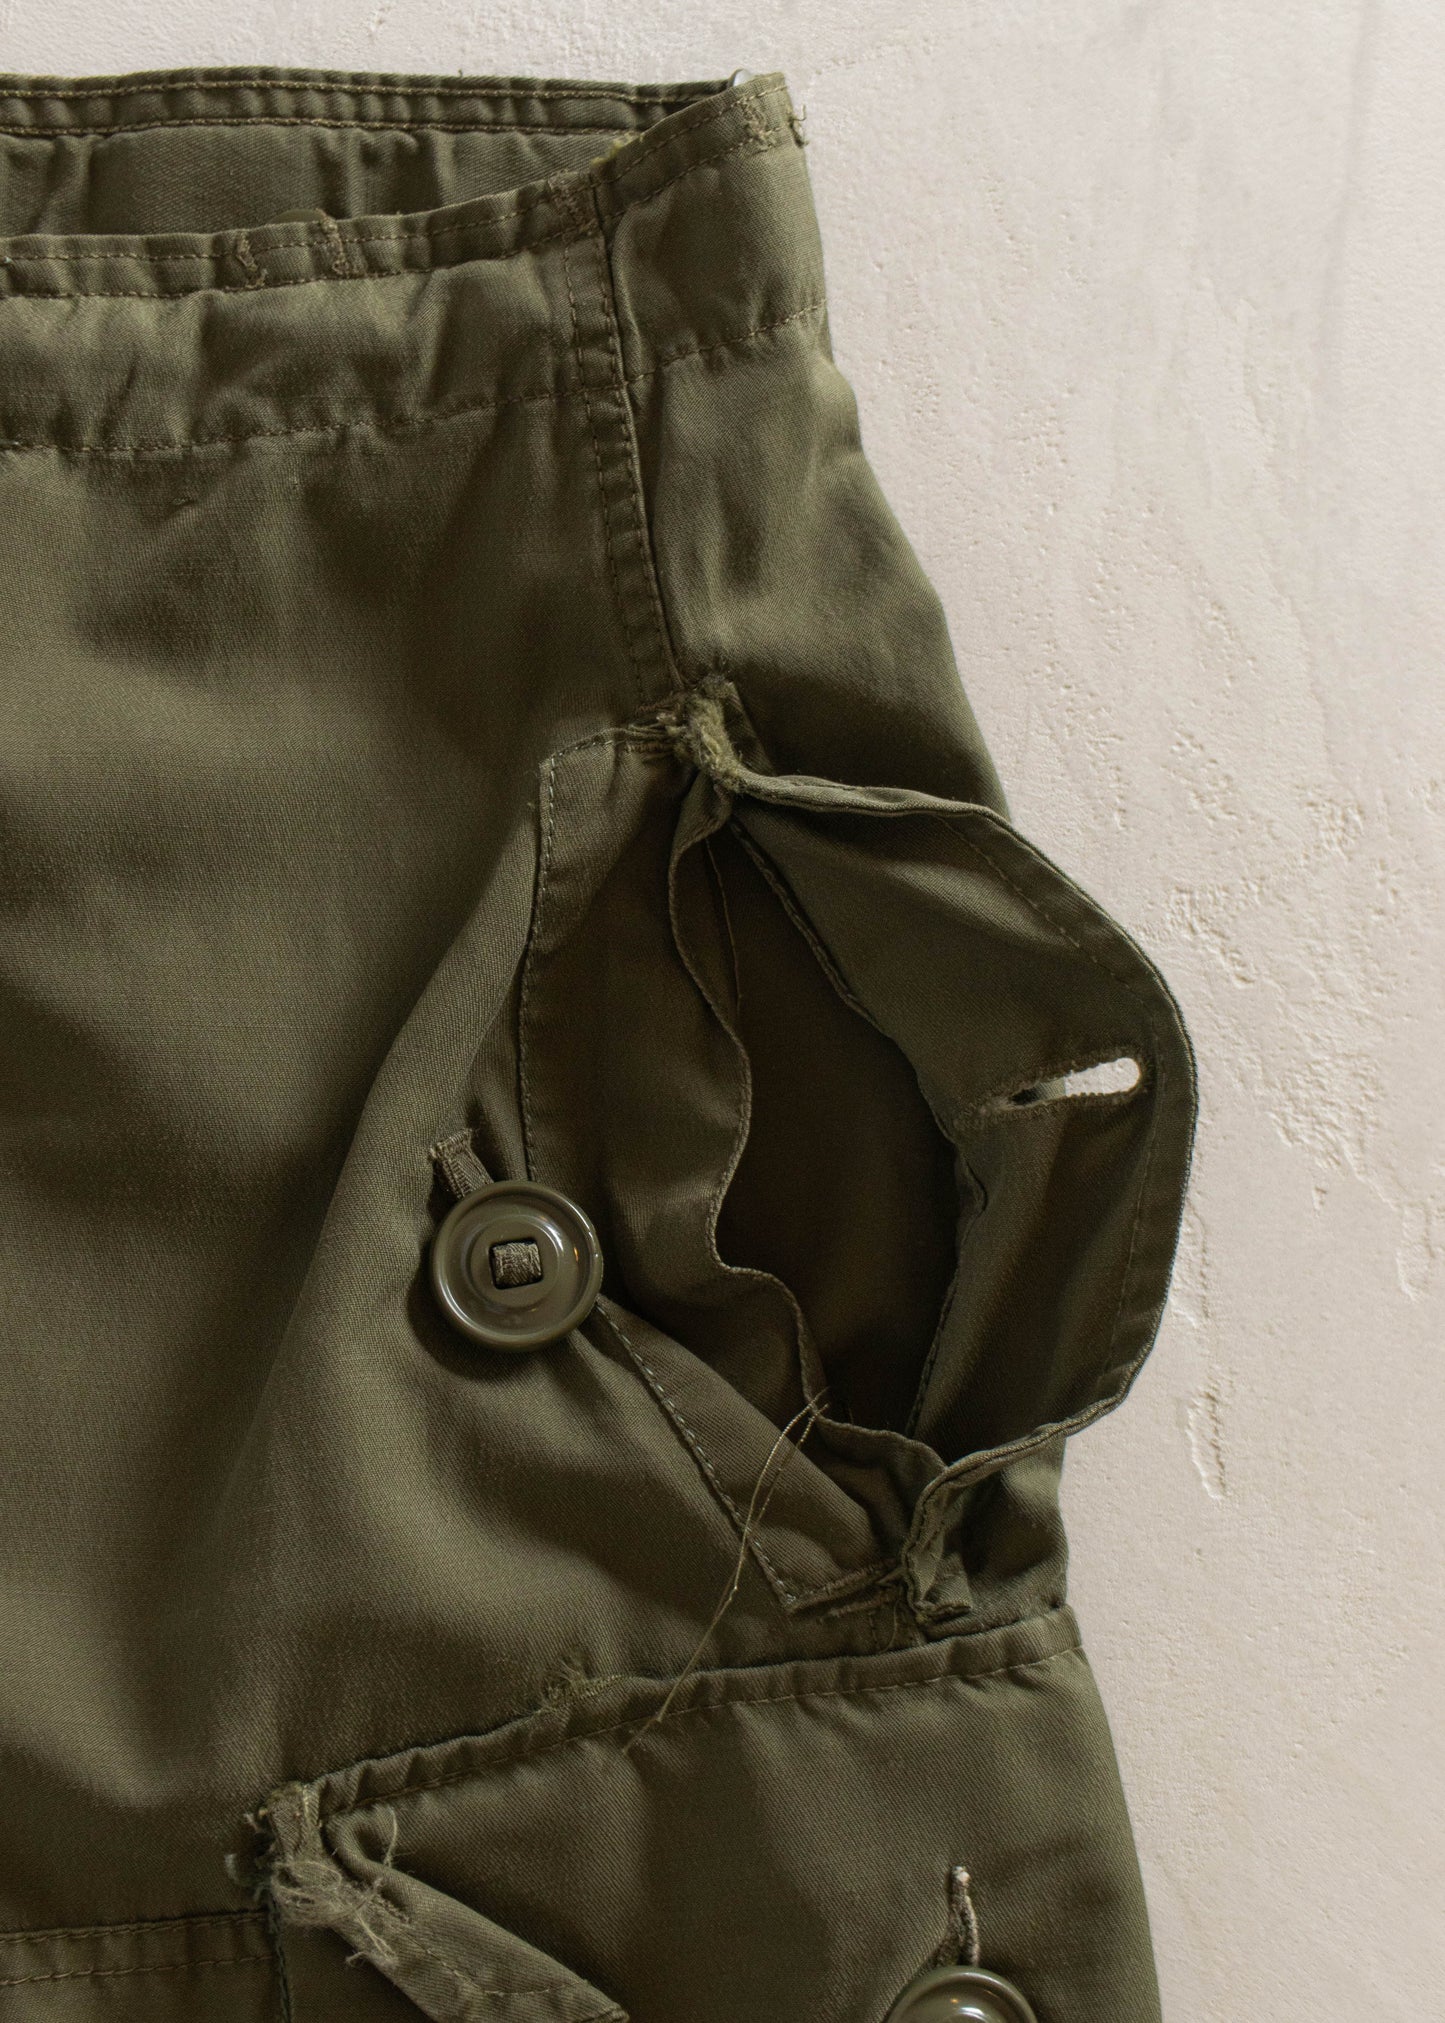 1980s Military Wind Cargo Pants Size M/L